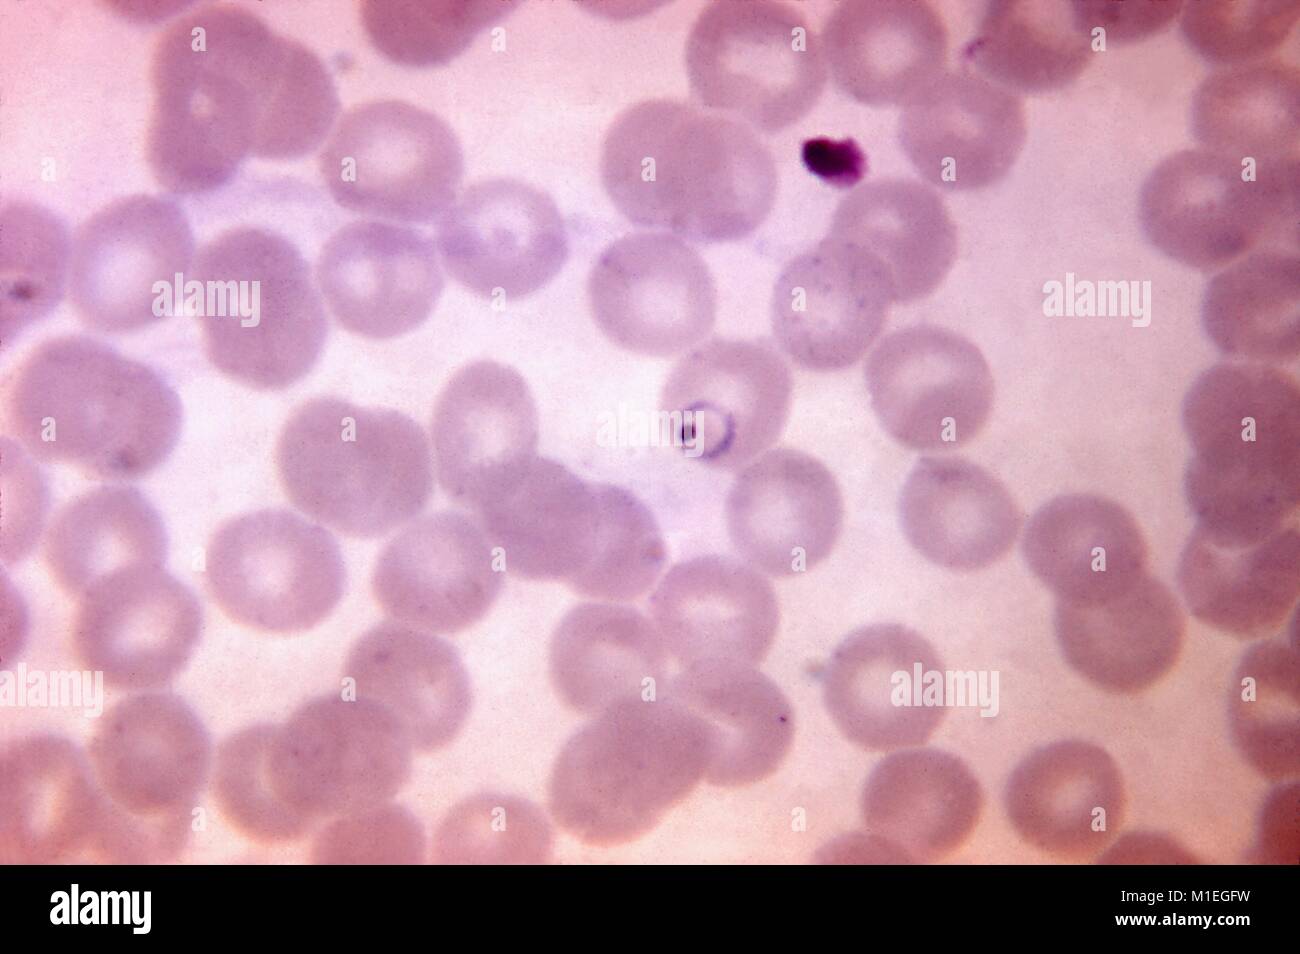 Plasmodium vivax ring form revealed in a blood smear micrograph film, 1970. Image courtesy Centers for Disease Control (CDC). () Stock Photo